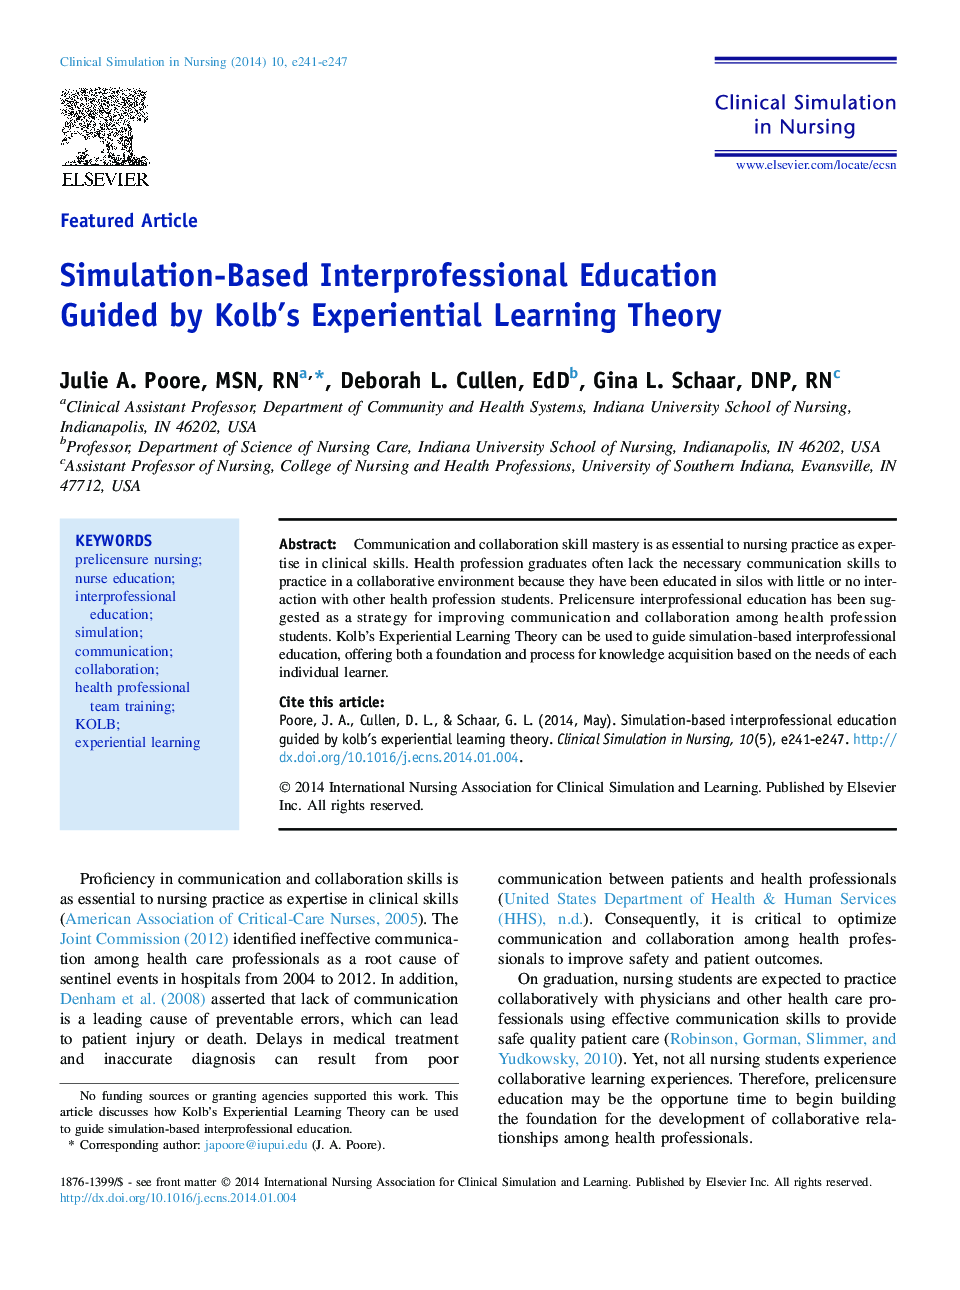 Featured ArticleSimulation-Based Interprofessional Education Guided by Kolb's Experiential Learning Theory